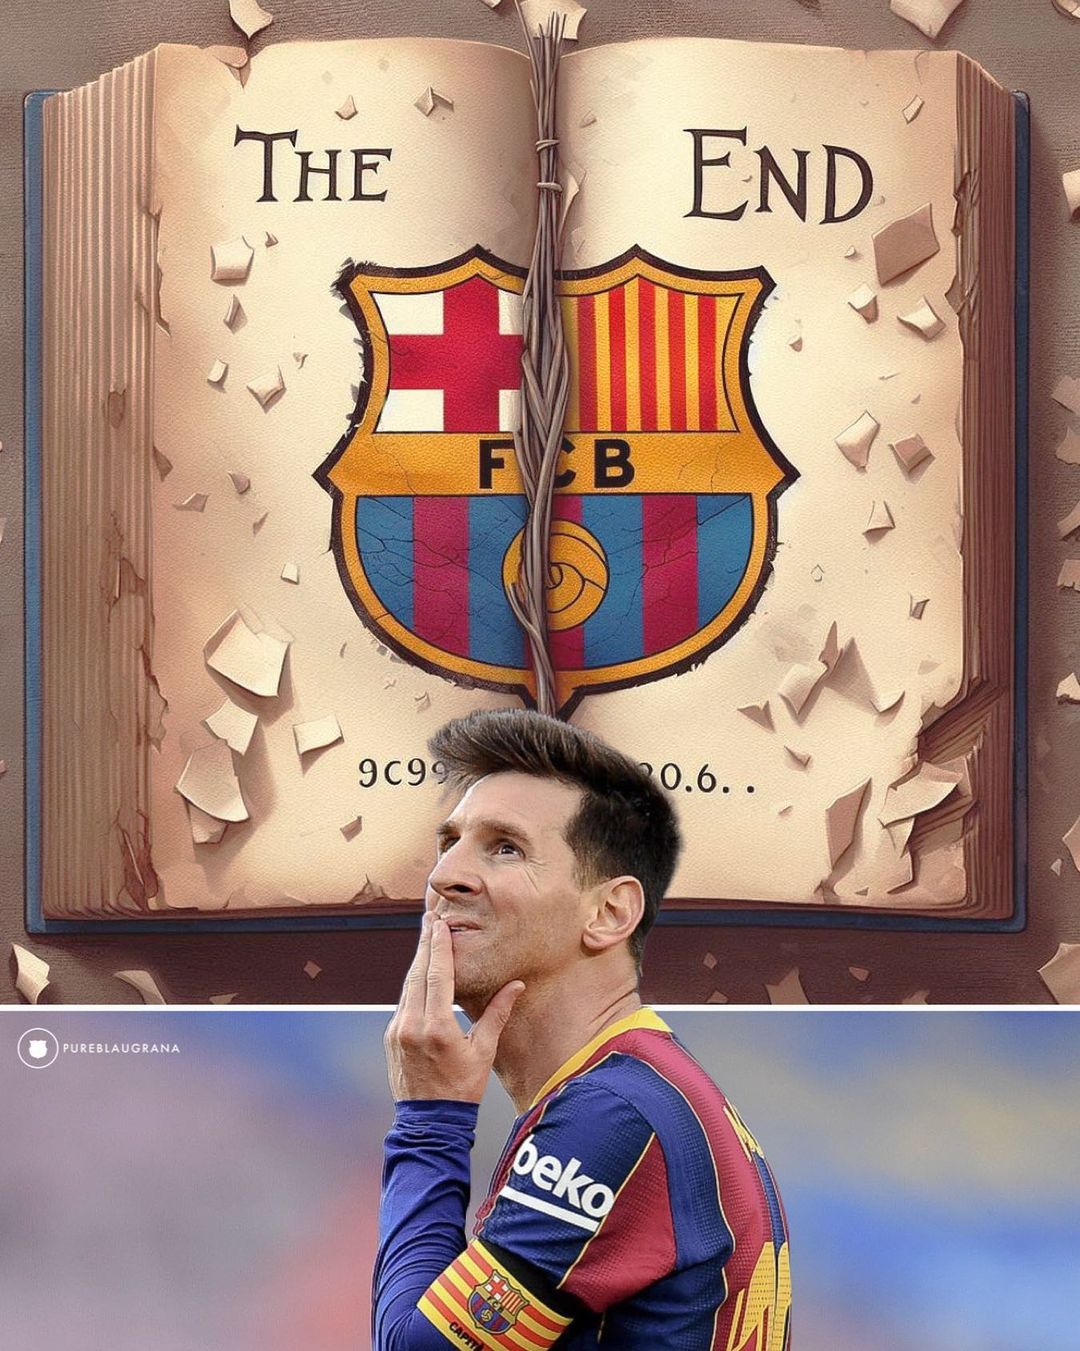 Football in 2024: End of Lionel Messi's Ballon d'Or reign, focus